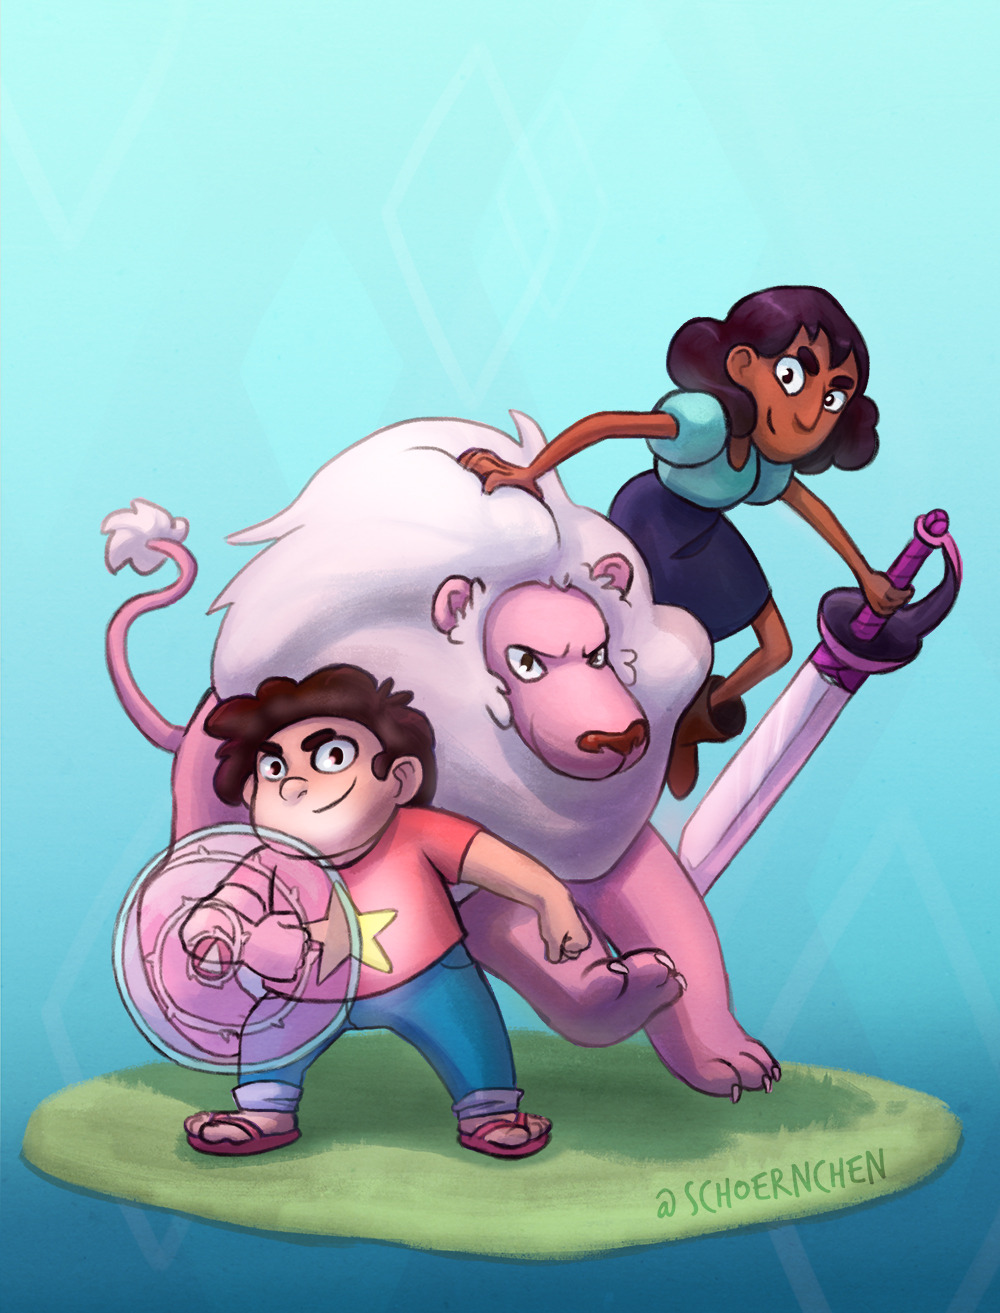 Back to Steven Universe. I love this trio. I love how uncomplicated and natural the relationship between Connie and Steven is. They got their problems from time to time, but they work it out, as one...